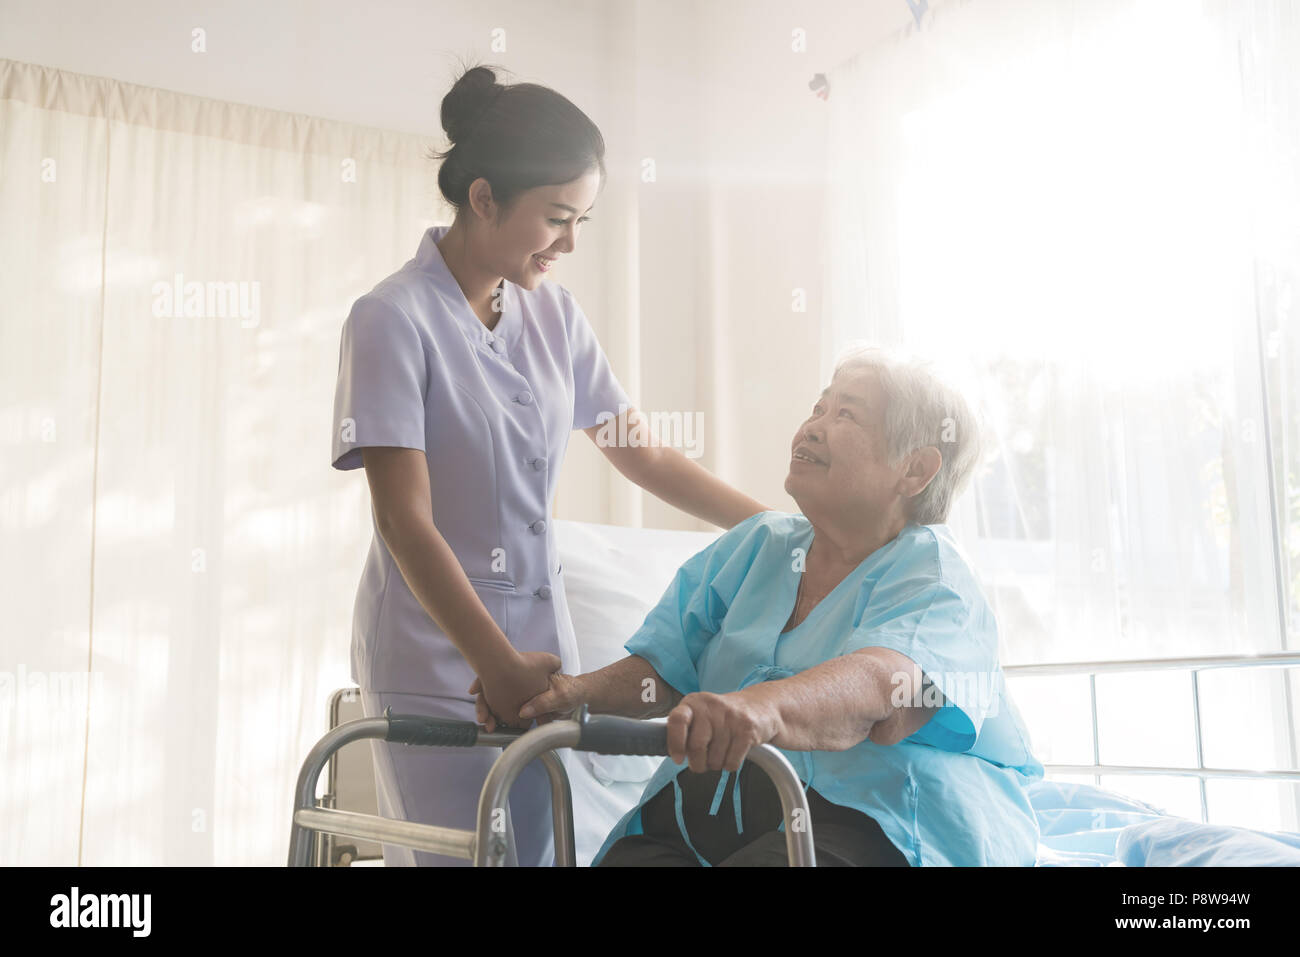 Asian young nurse supporting elderly patient disabled woman in using walker in hospital. Elderly patient care concept. Stock Photo